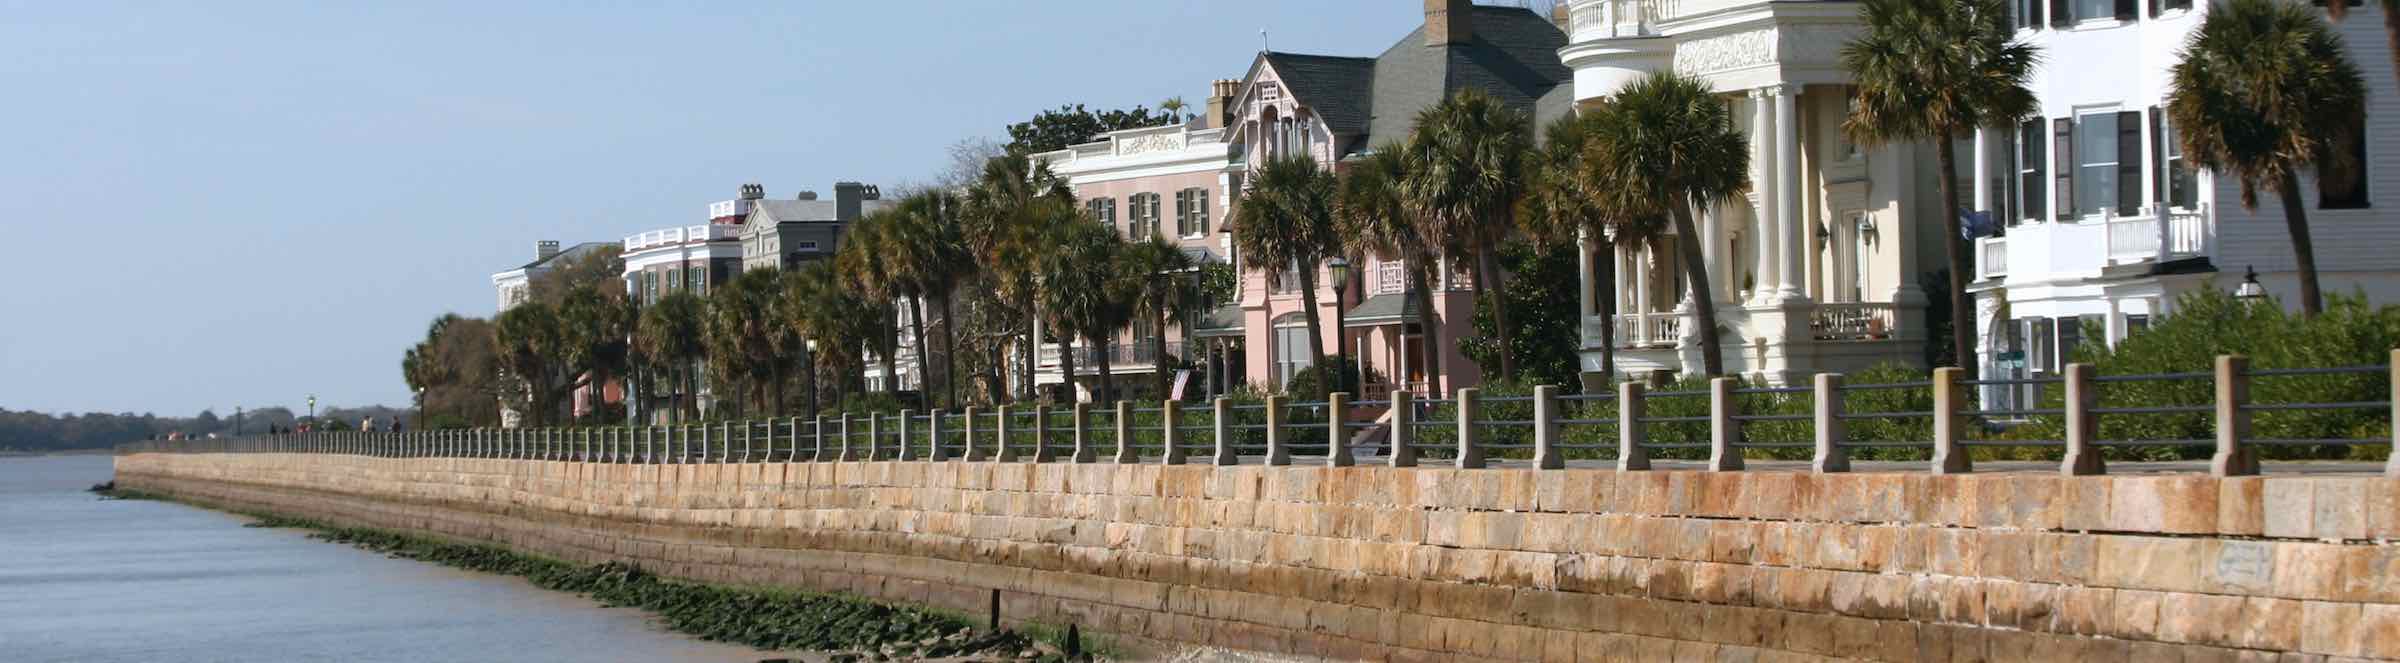 The Battery in historic downtown Charleston